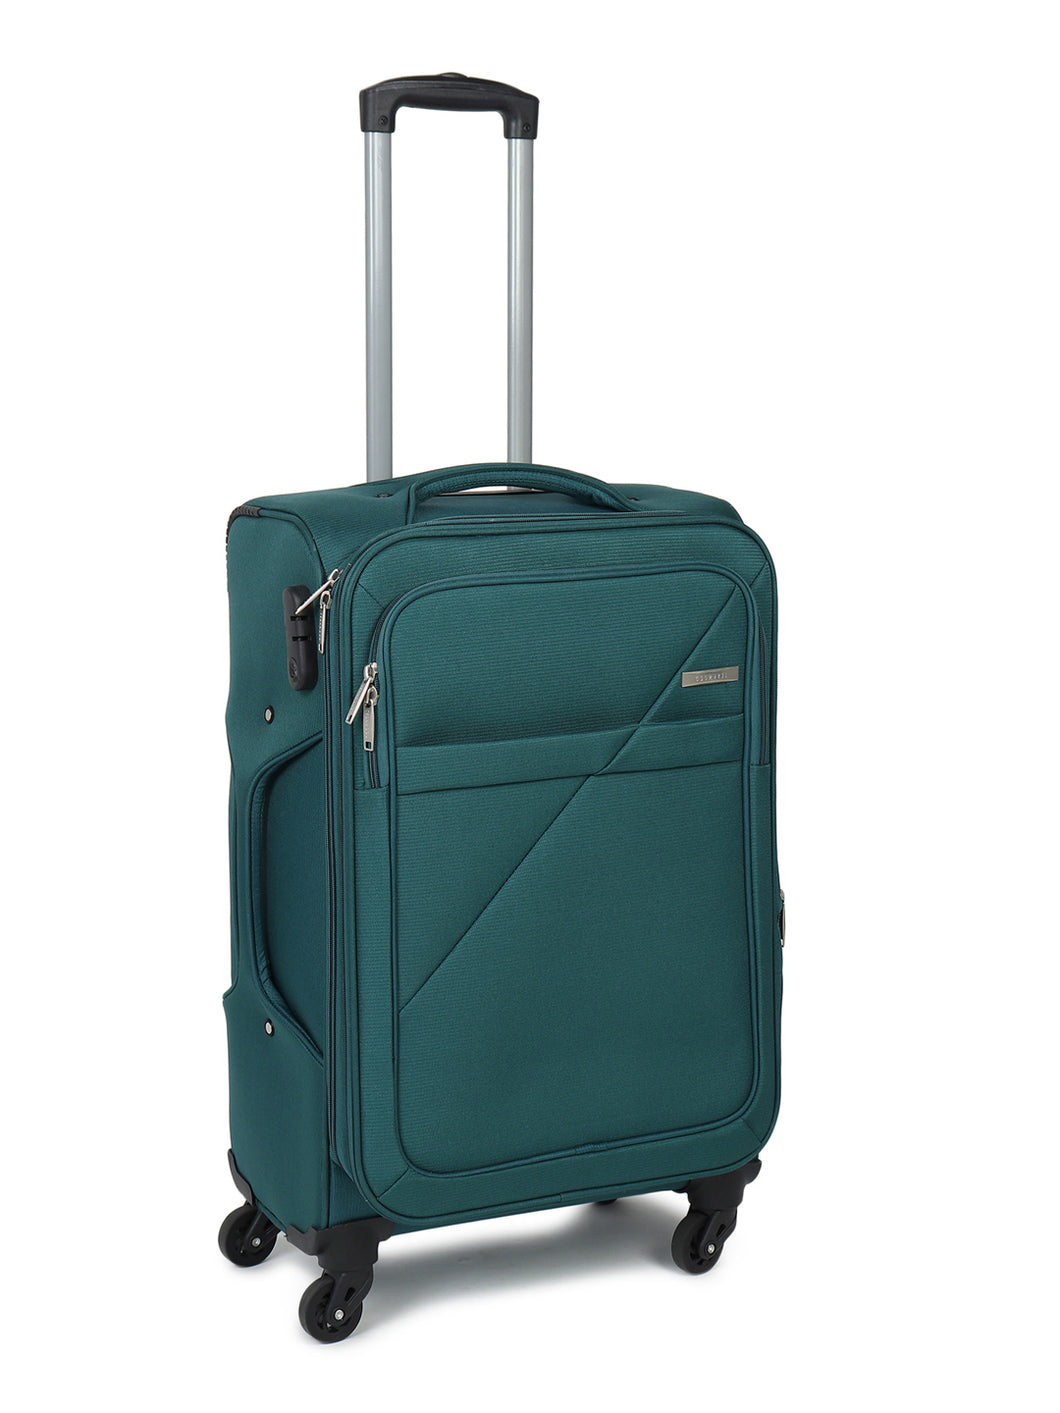 Teal Textured Soft-Sided Cabin Trolley Suitcase